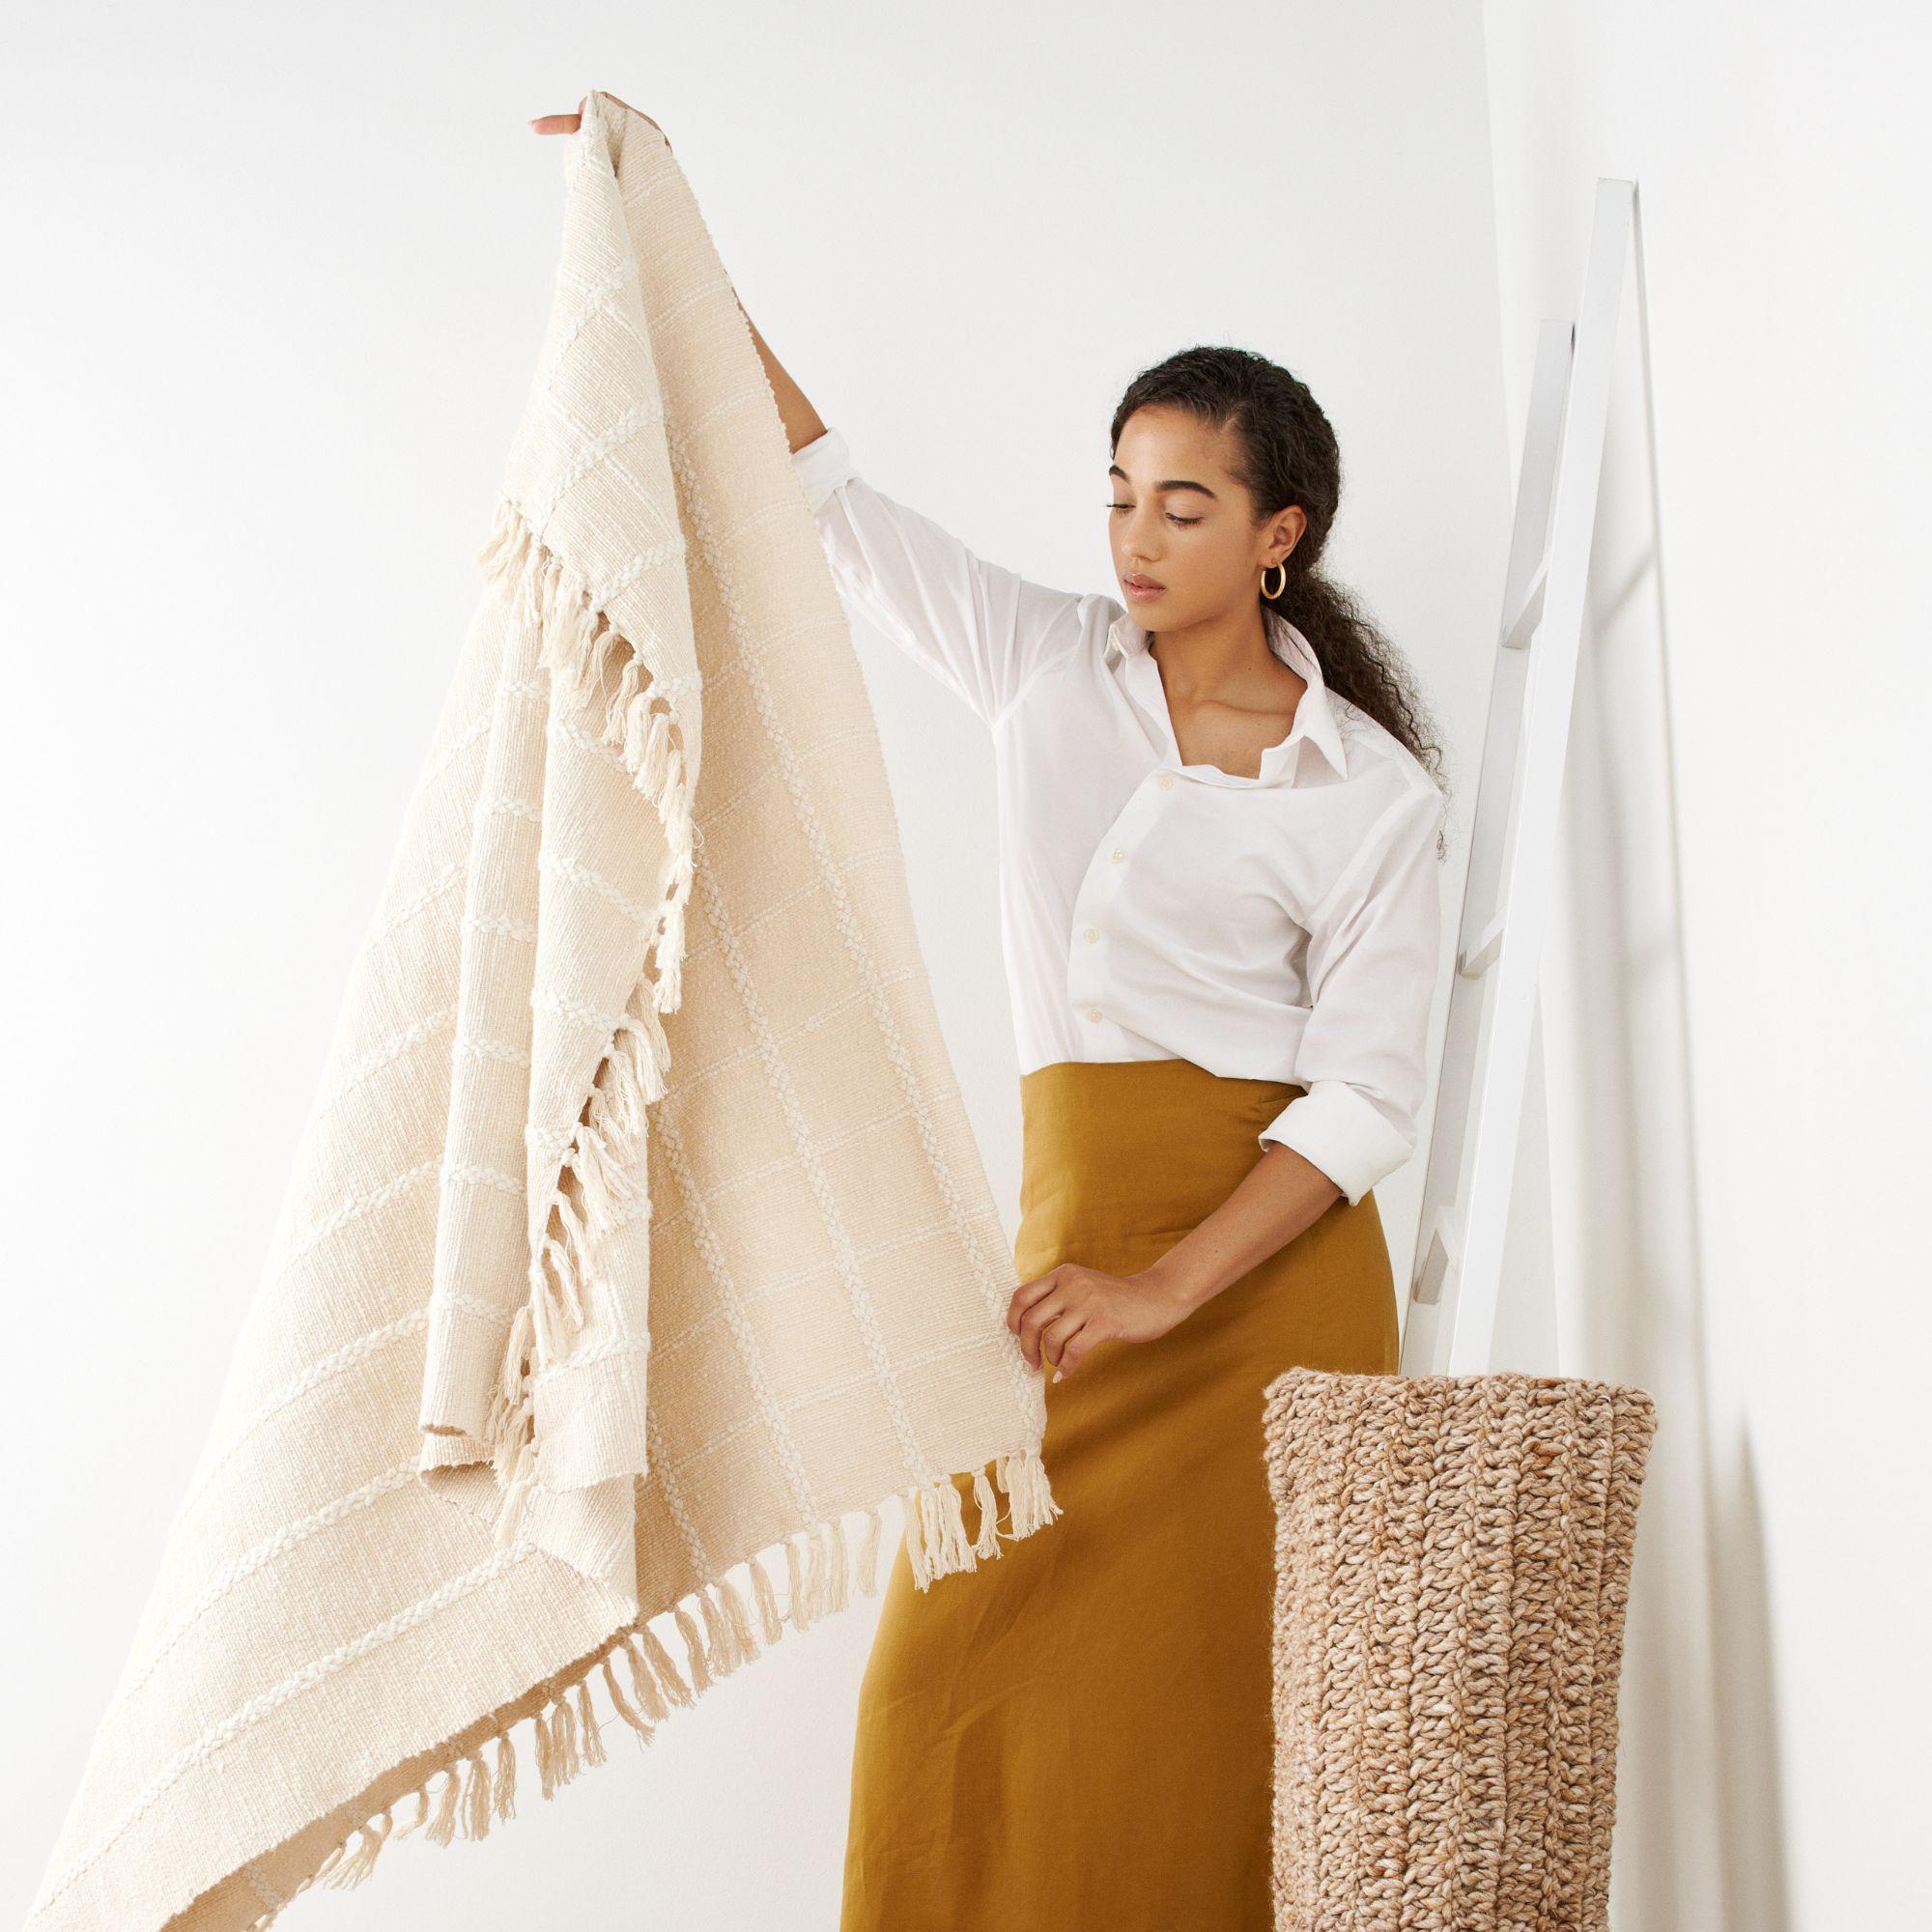 Sea Shell Throw is handwoven by weavers in India. The design of Sea Shell Throw  is made up of subtle textured checks pattern. Edges of this throw are made up of hand rolled fringes. 

Our textiles are incredibly soft textural feel and wears well